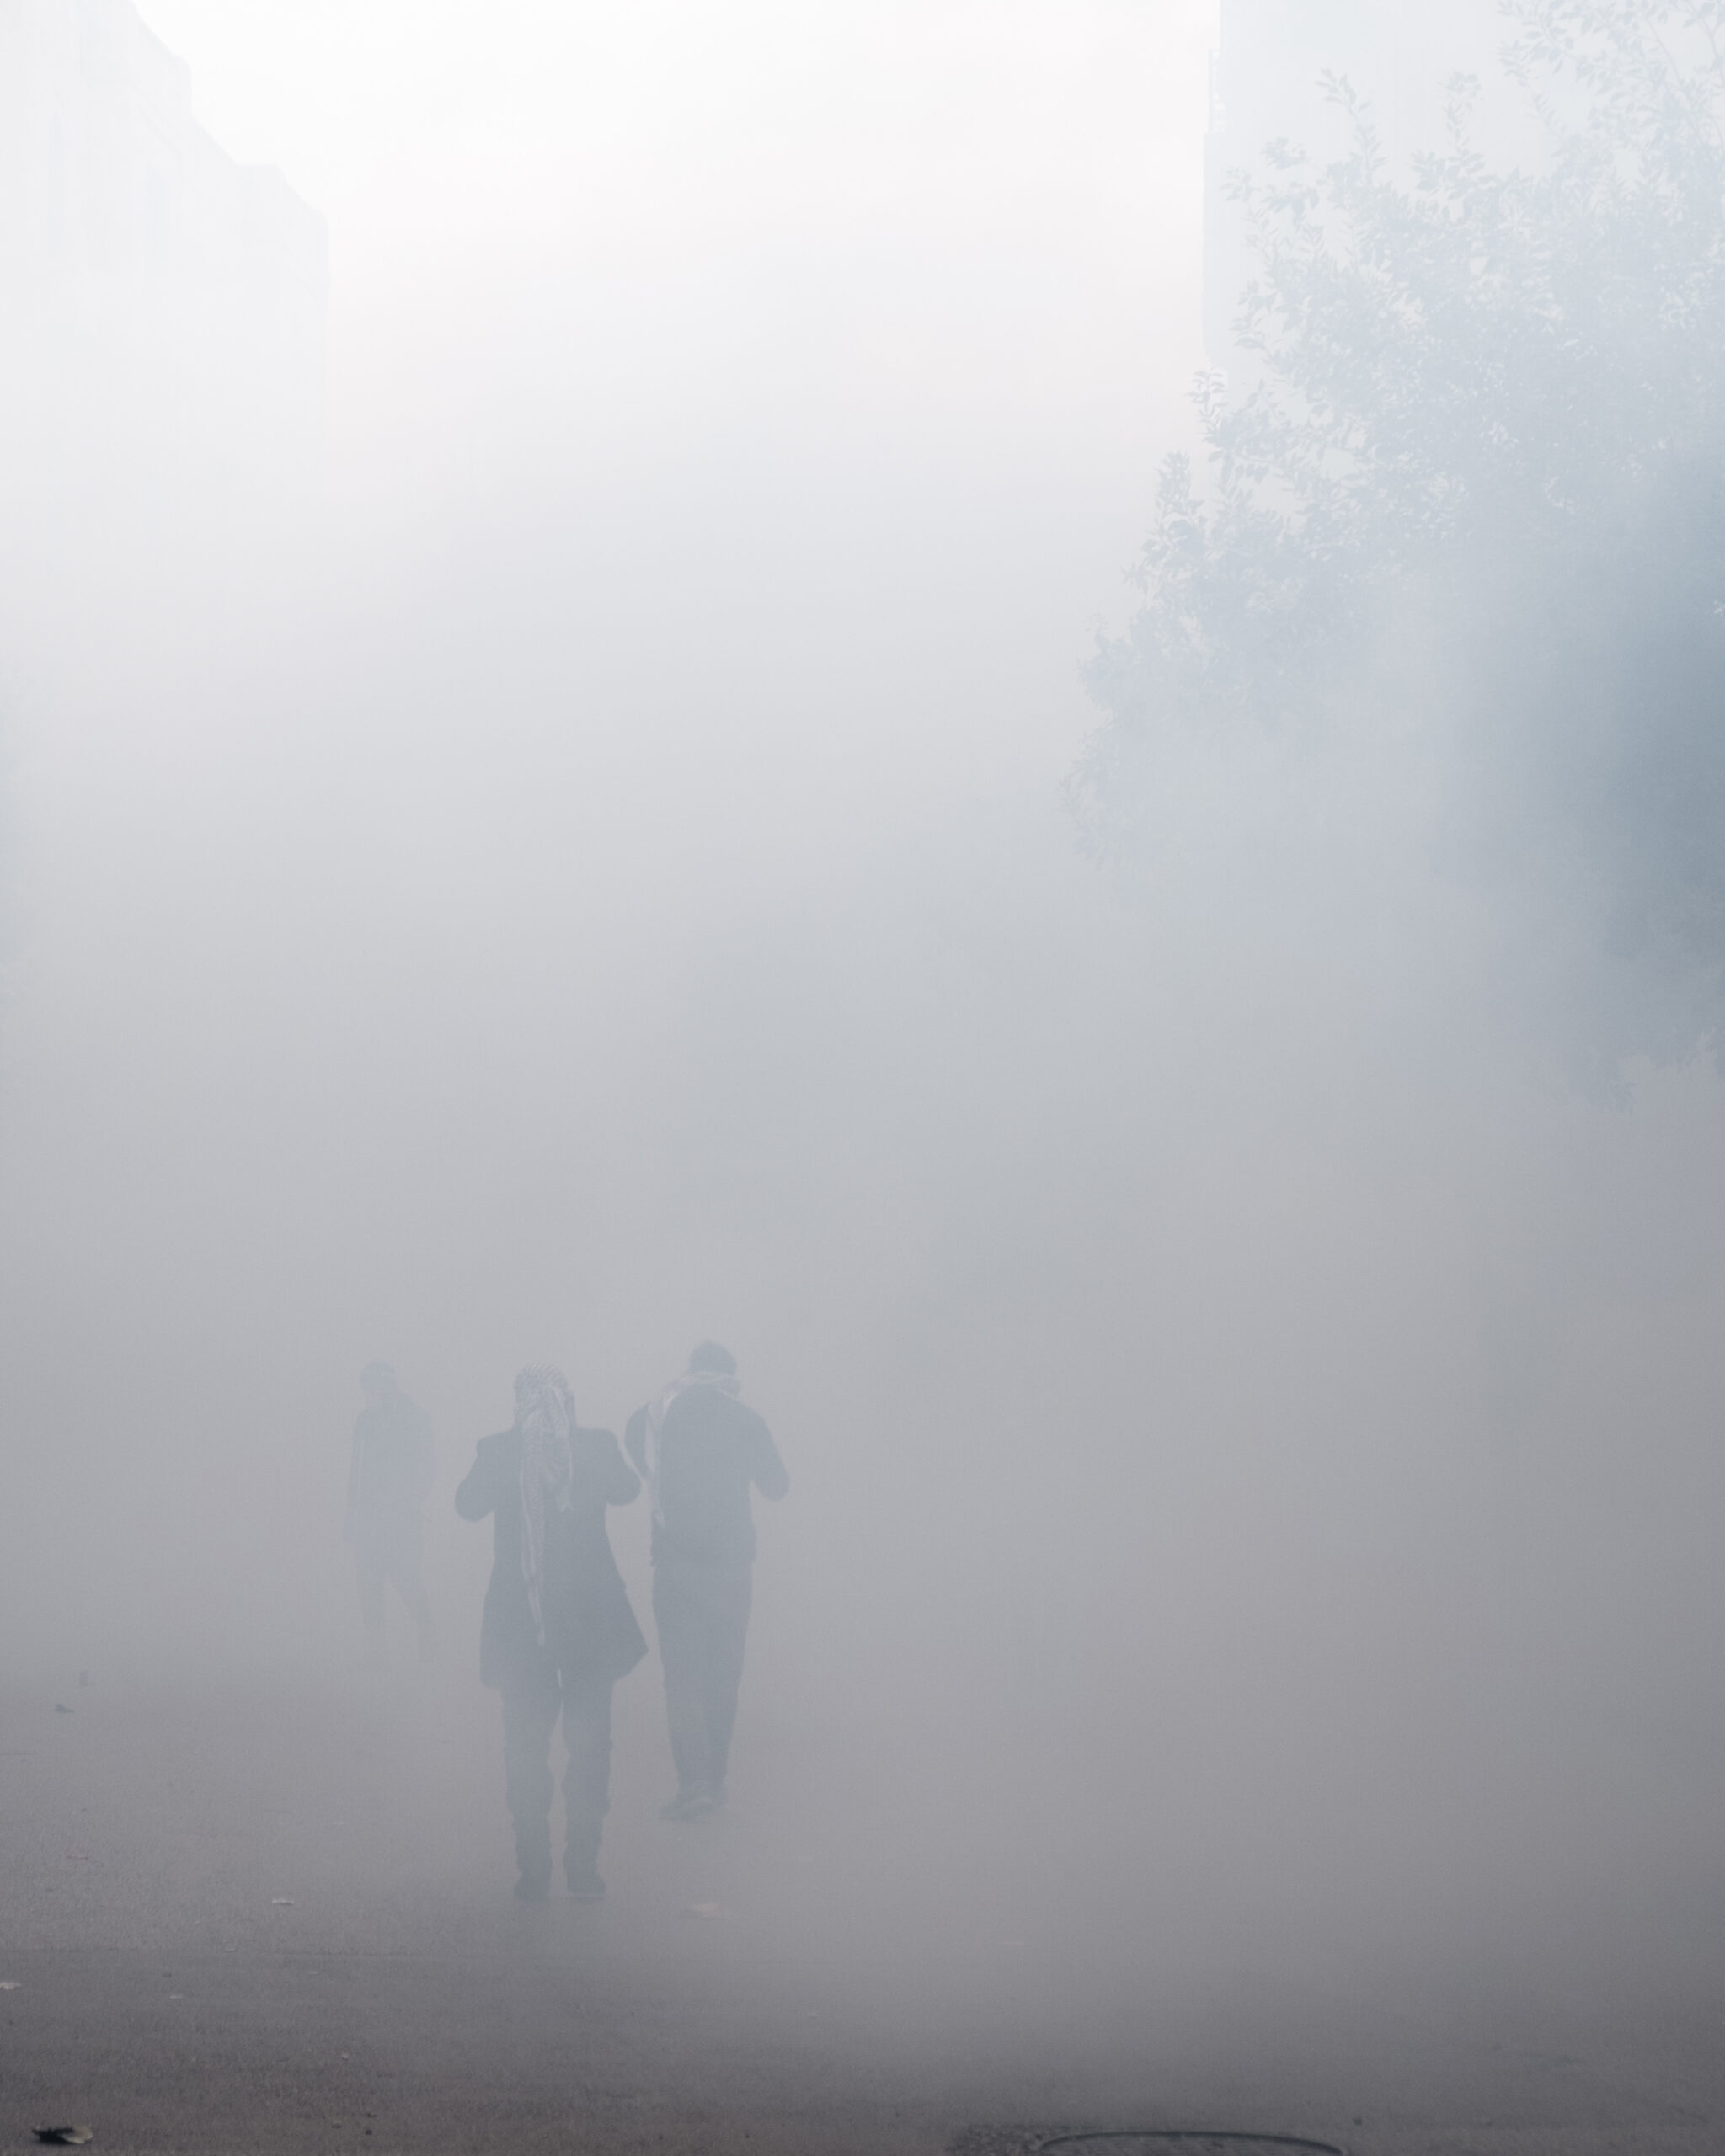 Excessive tear gas fired at the protesters on the day of Parliament’s confidence vote.  11 February 2020. 